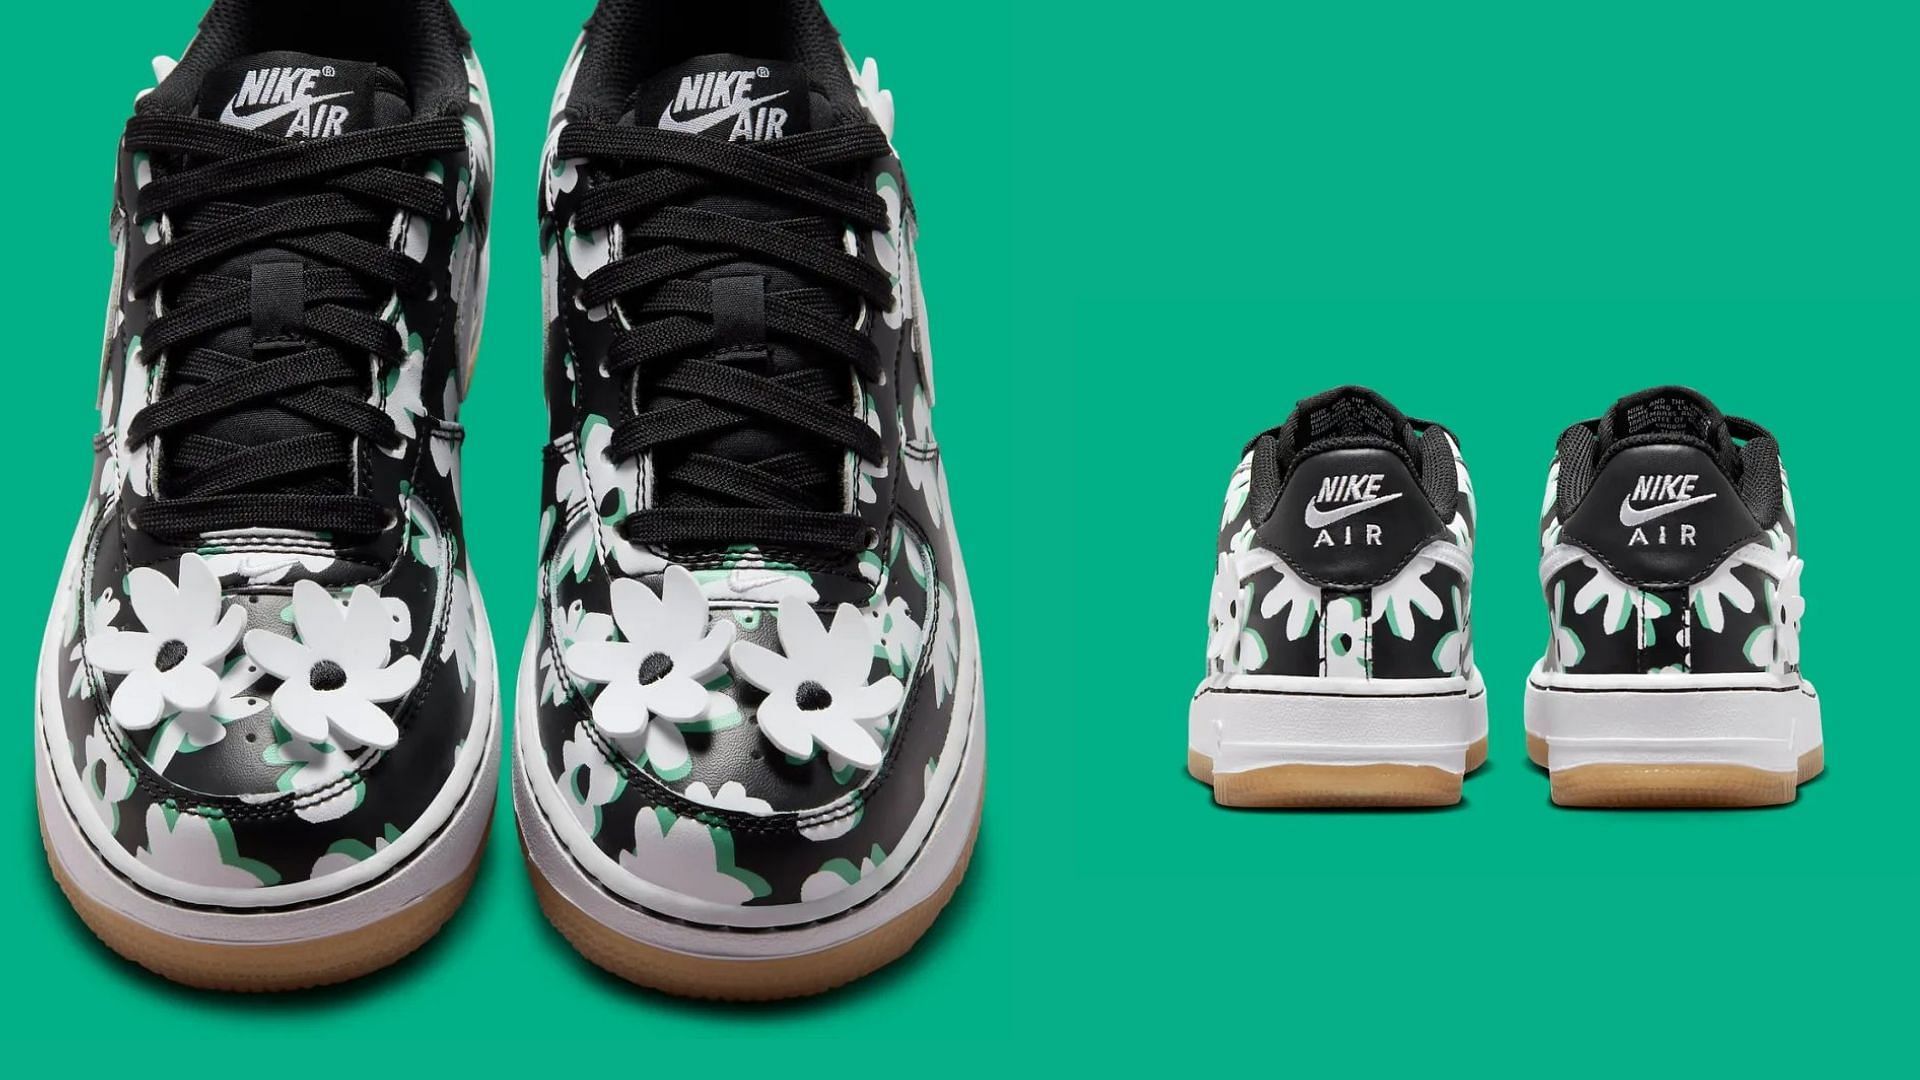 Nike Air Force 1 Low “Black White Flowers” shoes: Everything we know so far